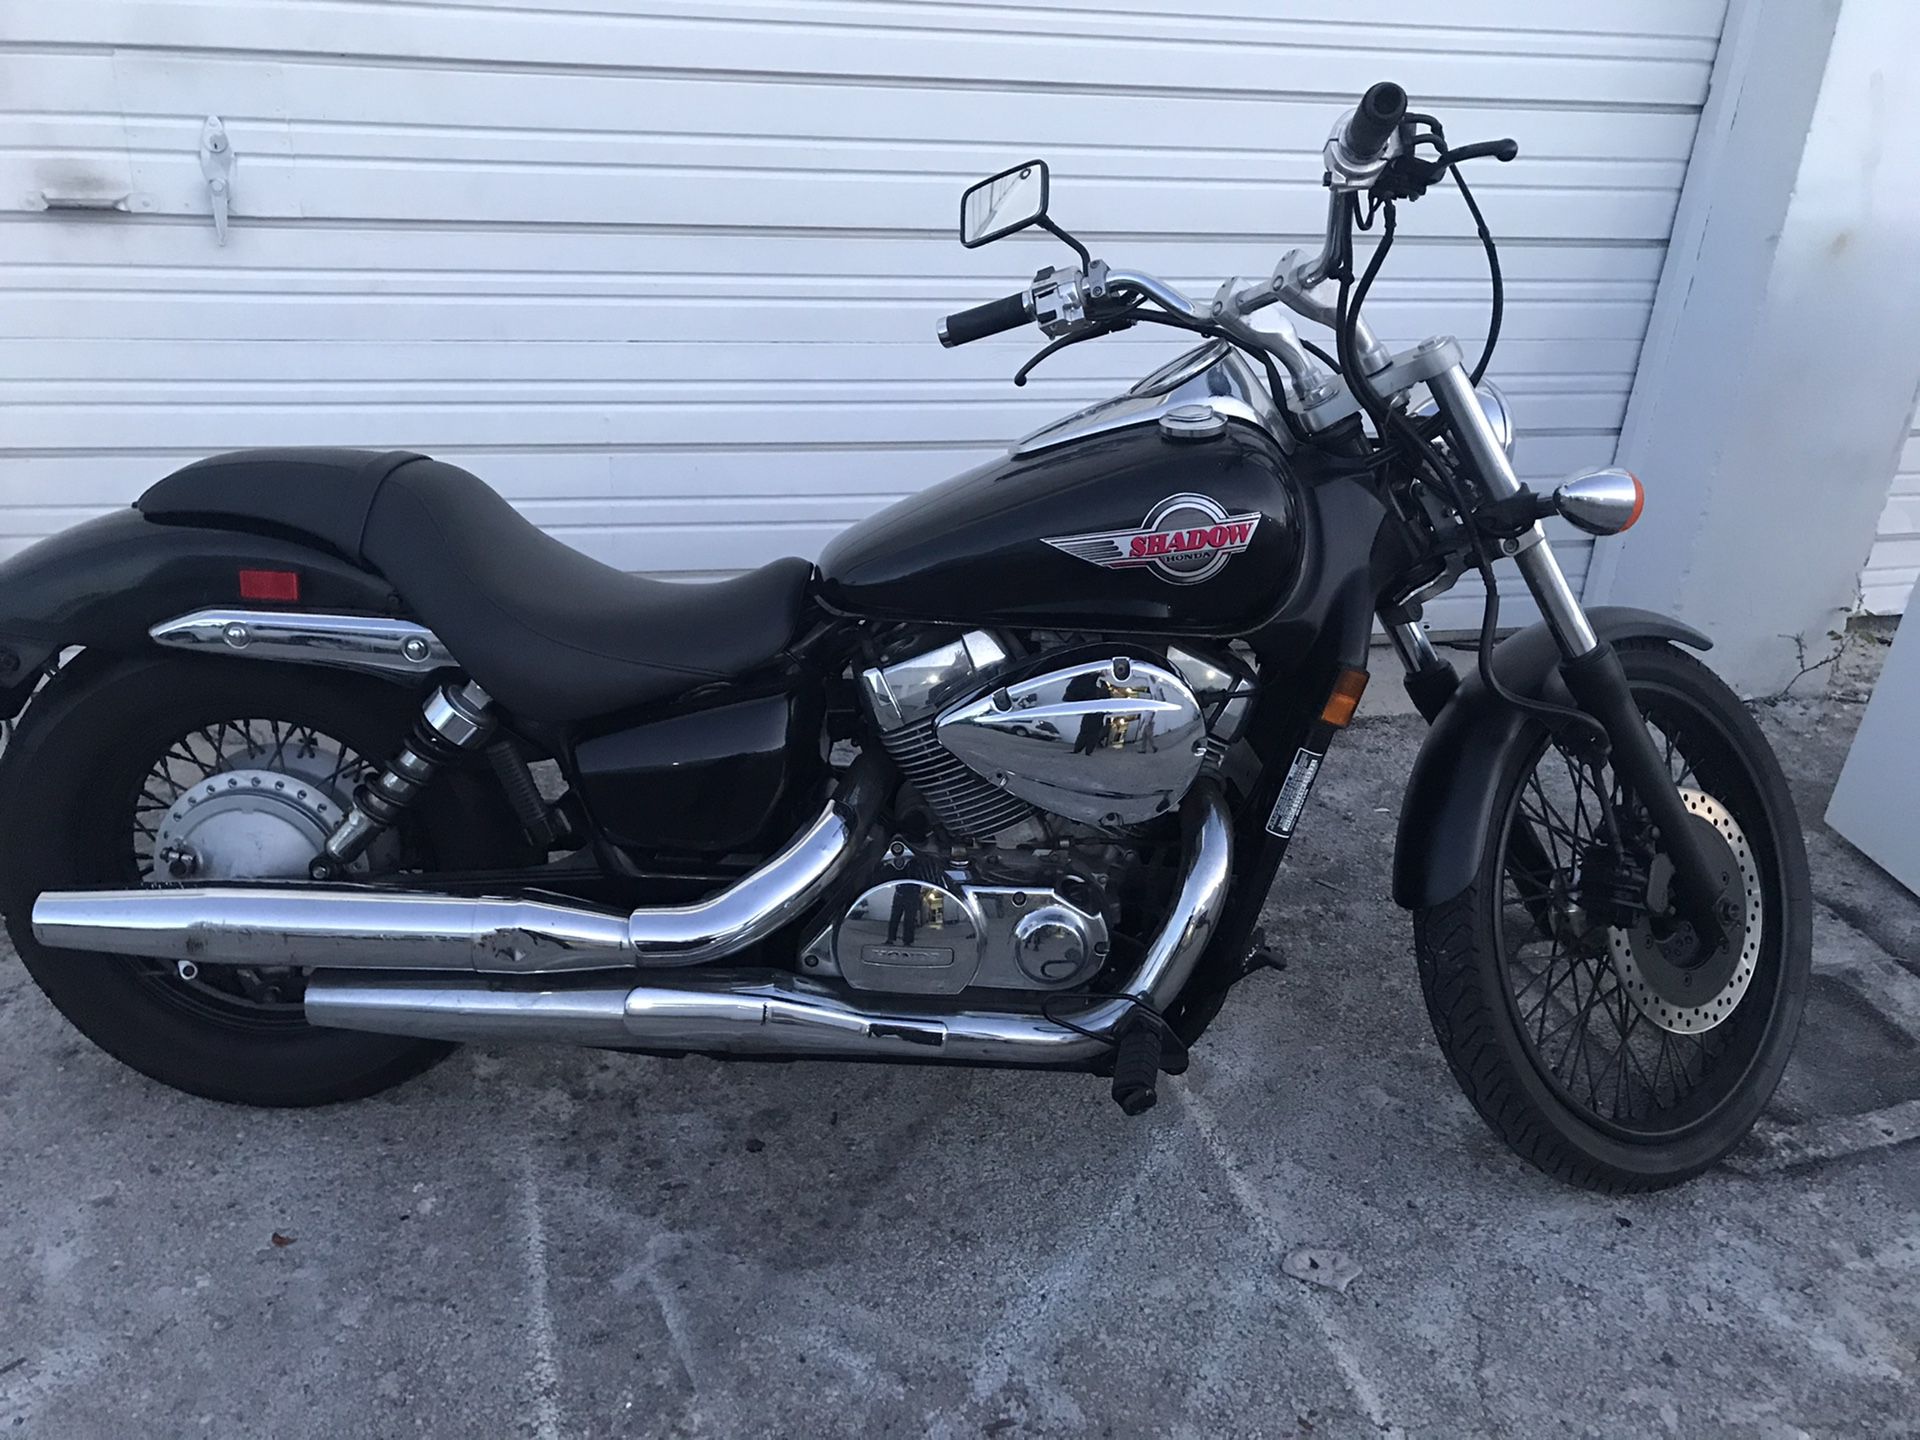 Honda Shadow 750 motorcycle 2009 with 20,000 miles in great condition